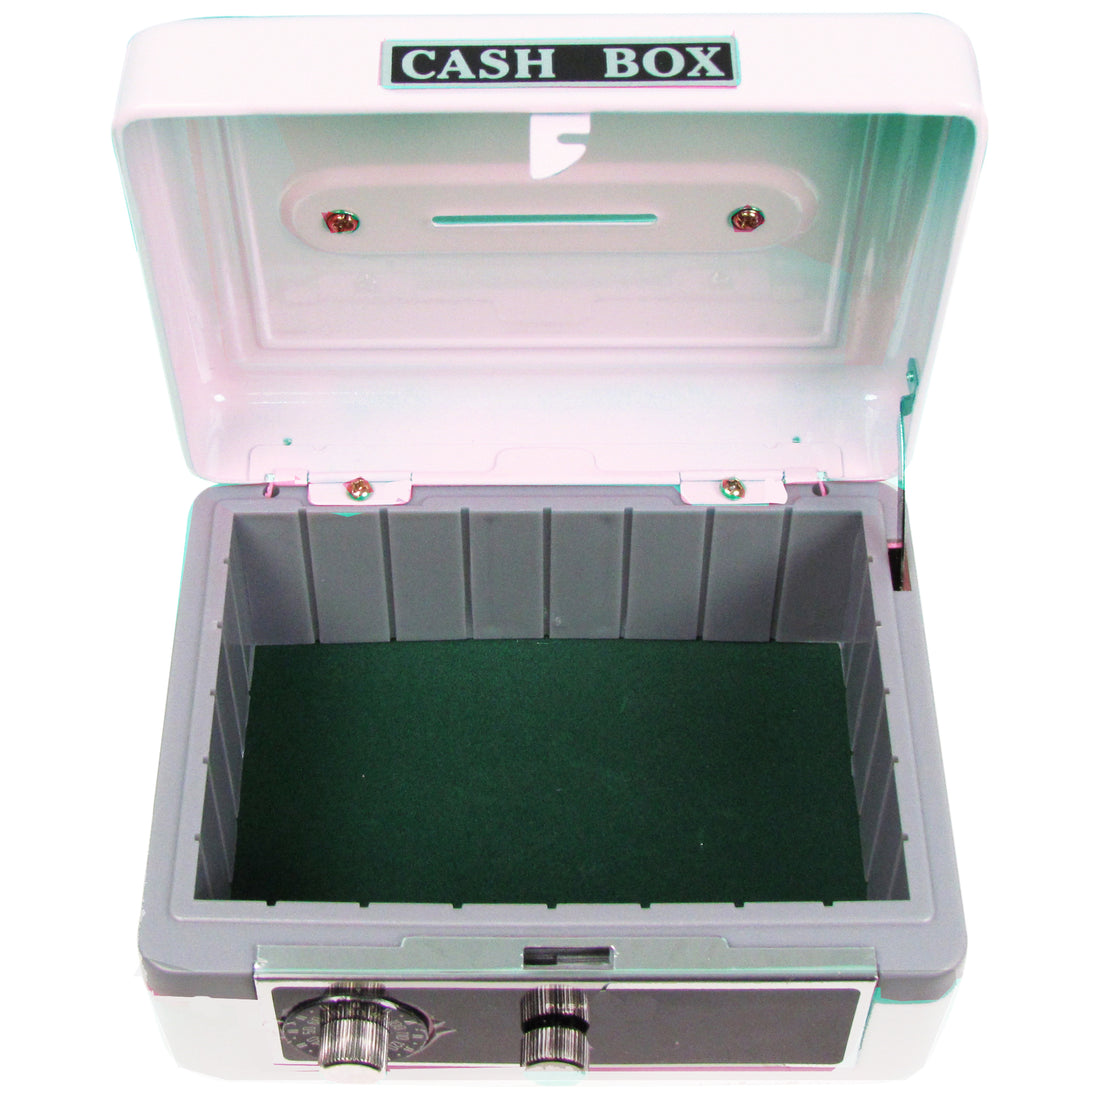 Personalized White Cash Box with Dollar Signs Black design